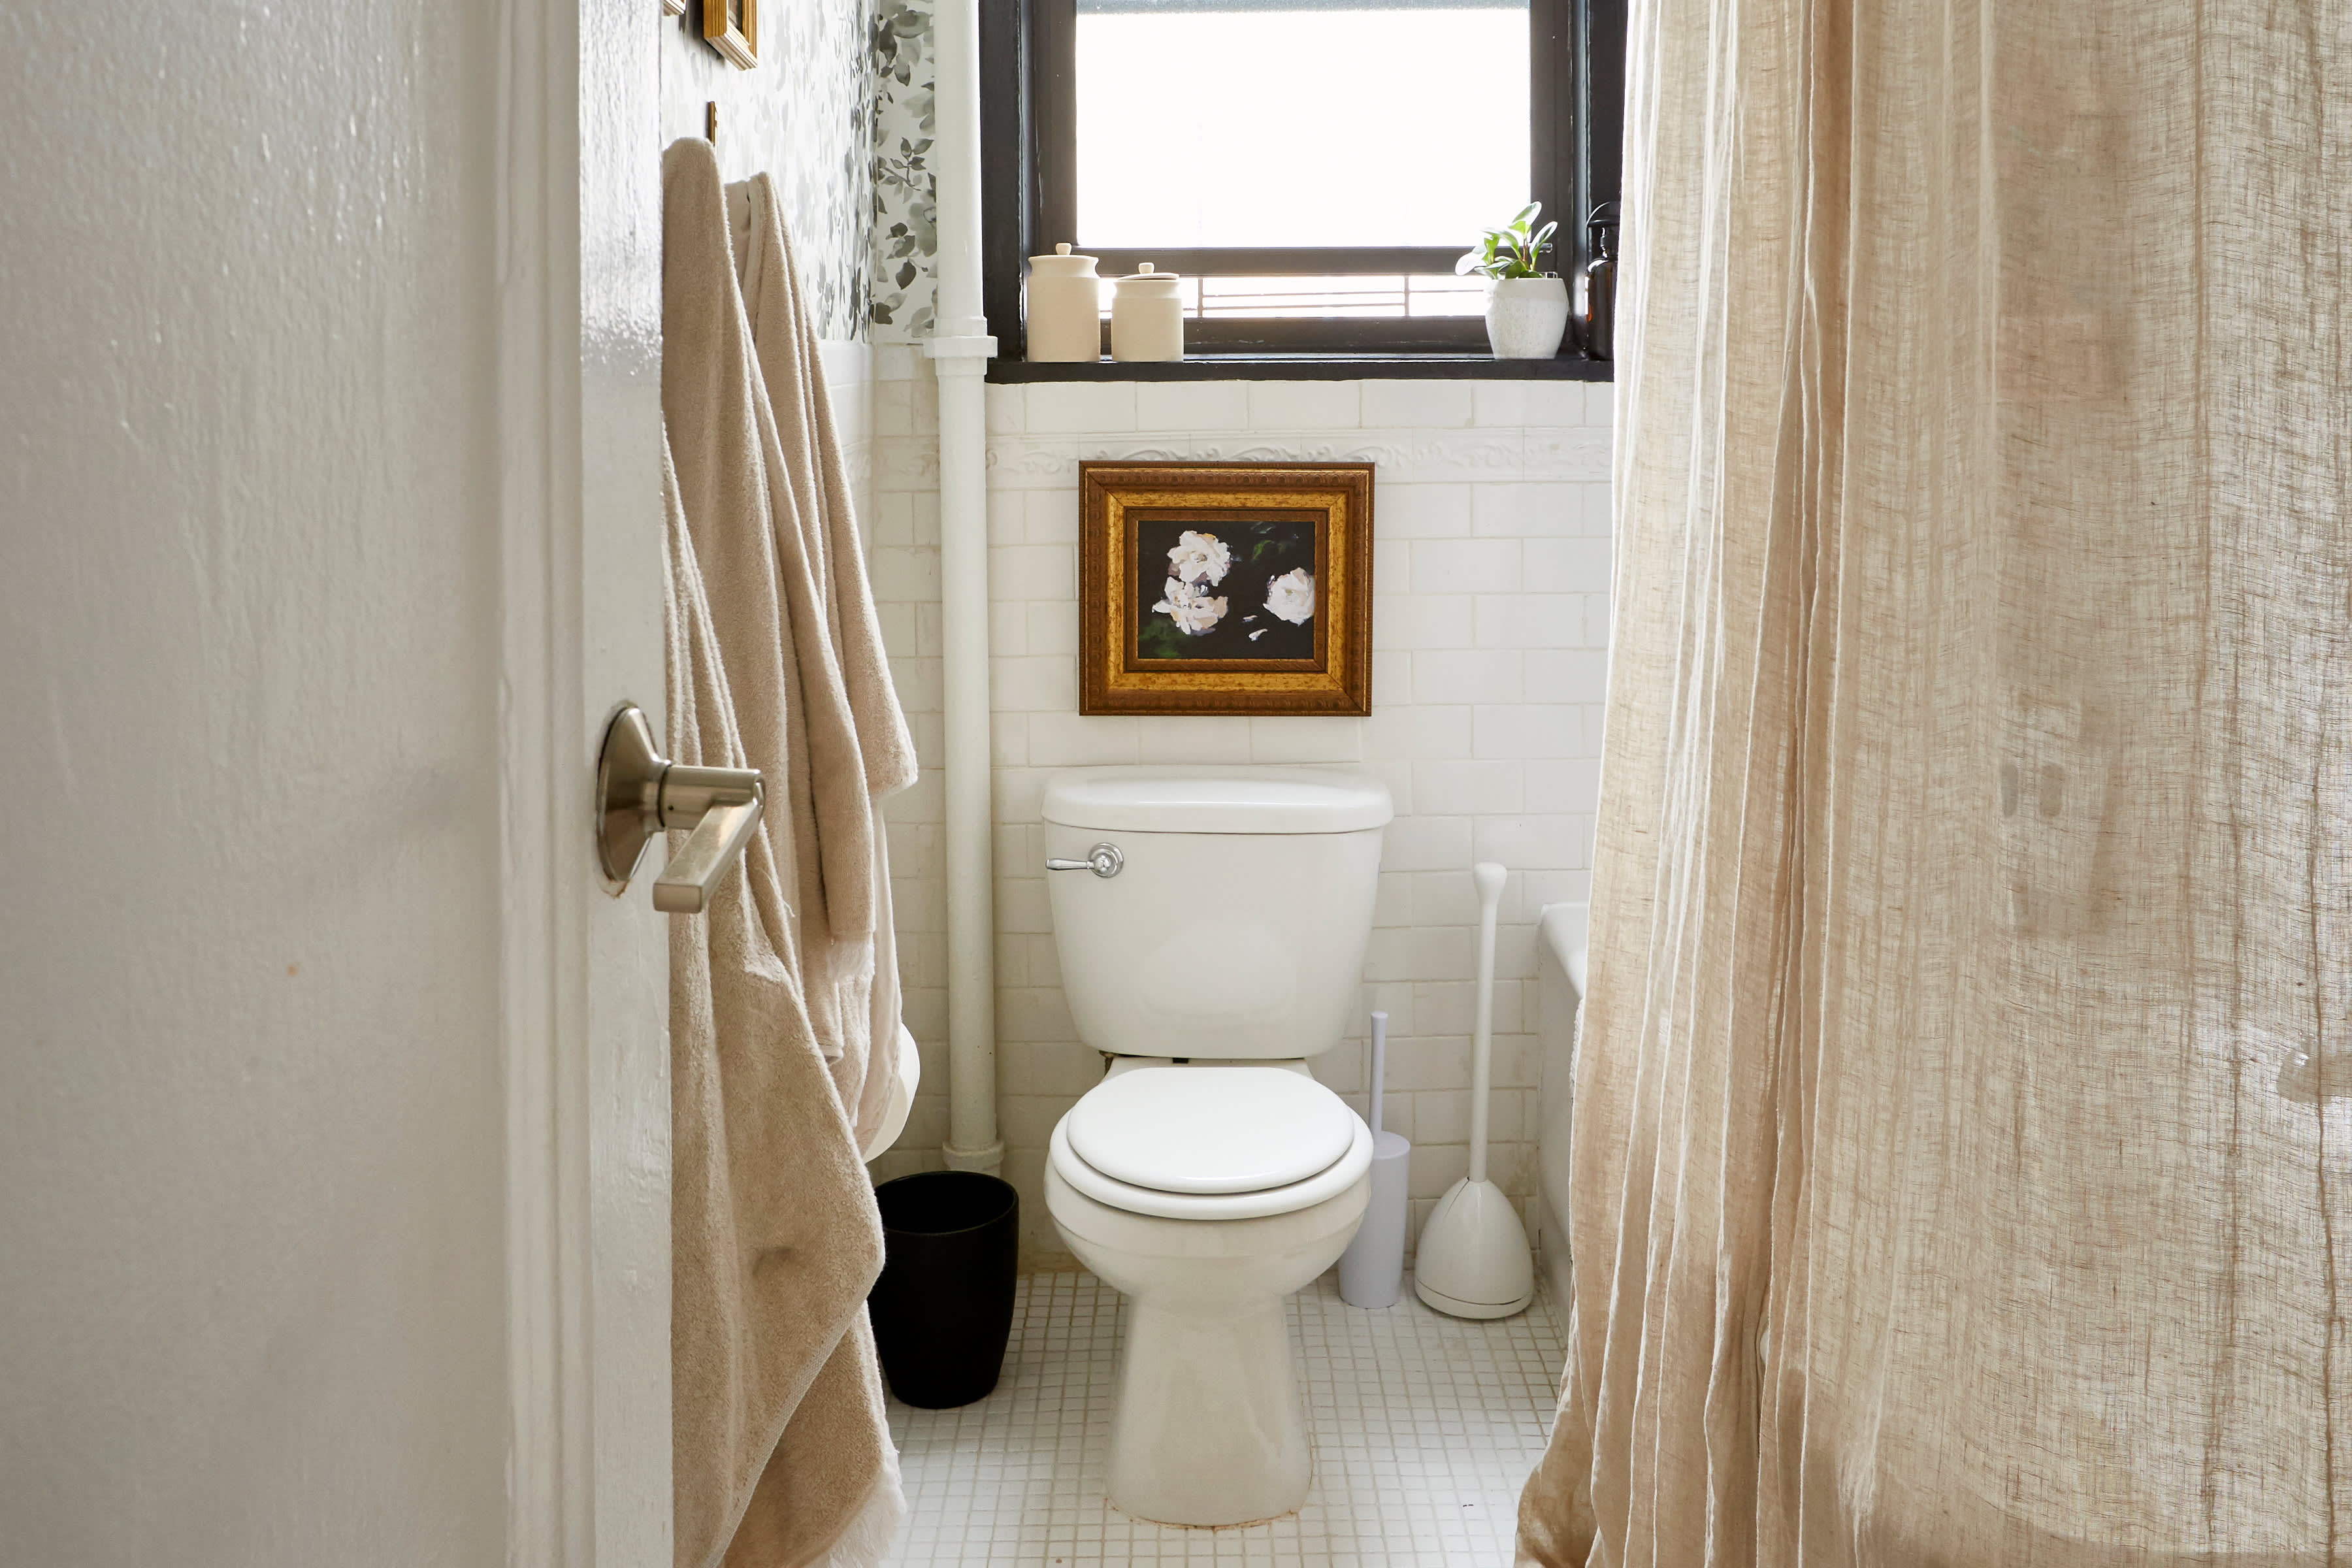 Ideas for Hanging Towels in a Bathroom - Small Stuff Counts